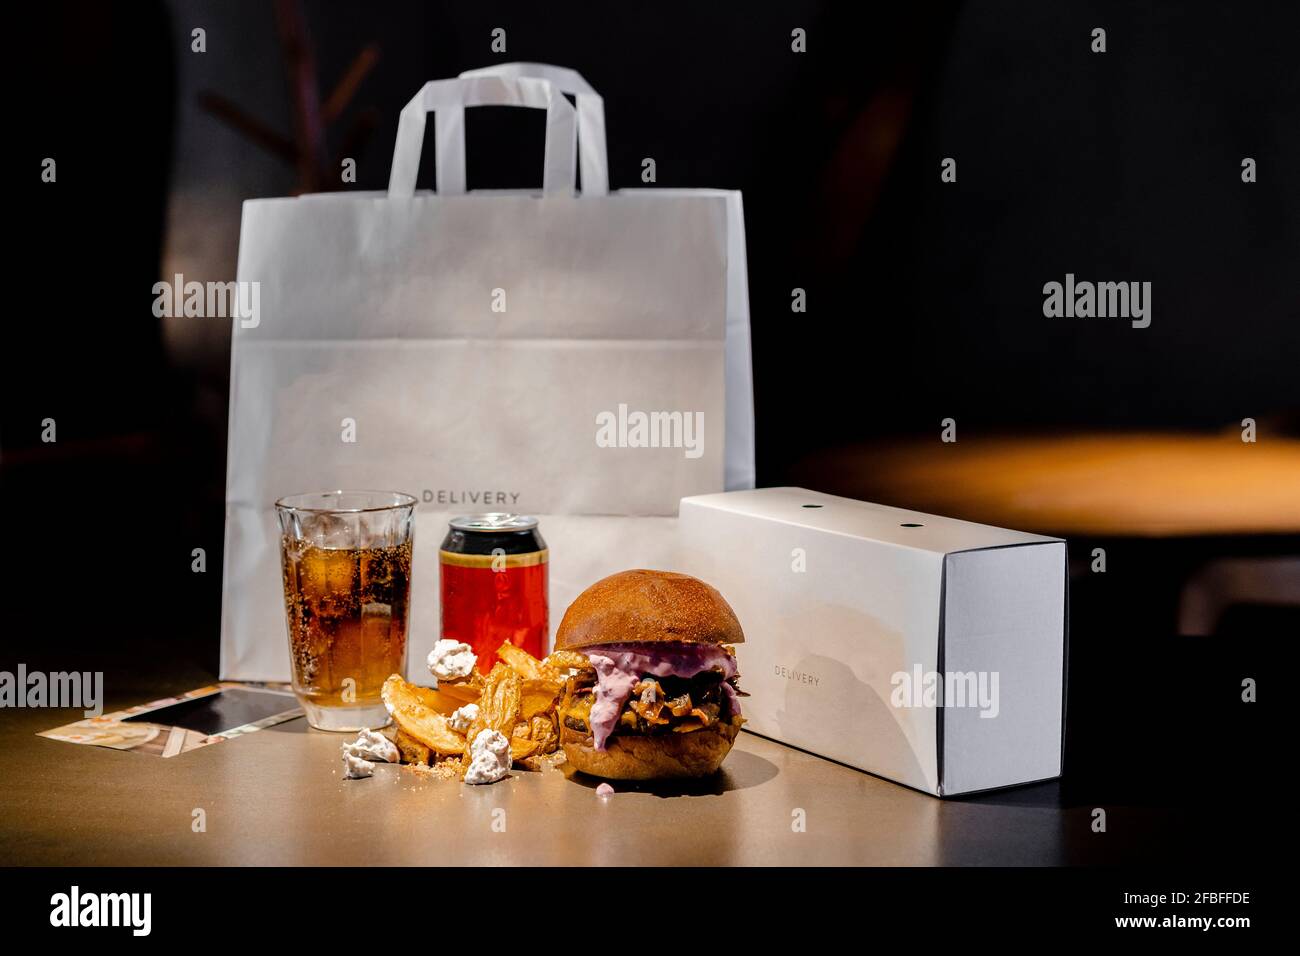 Food and drink arranged by paper bag and box on kitchen island Stock Photo